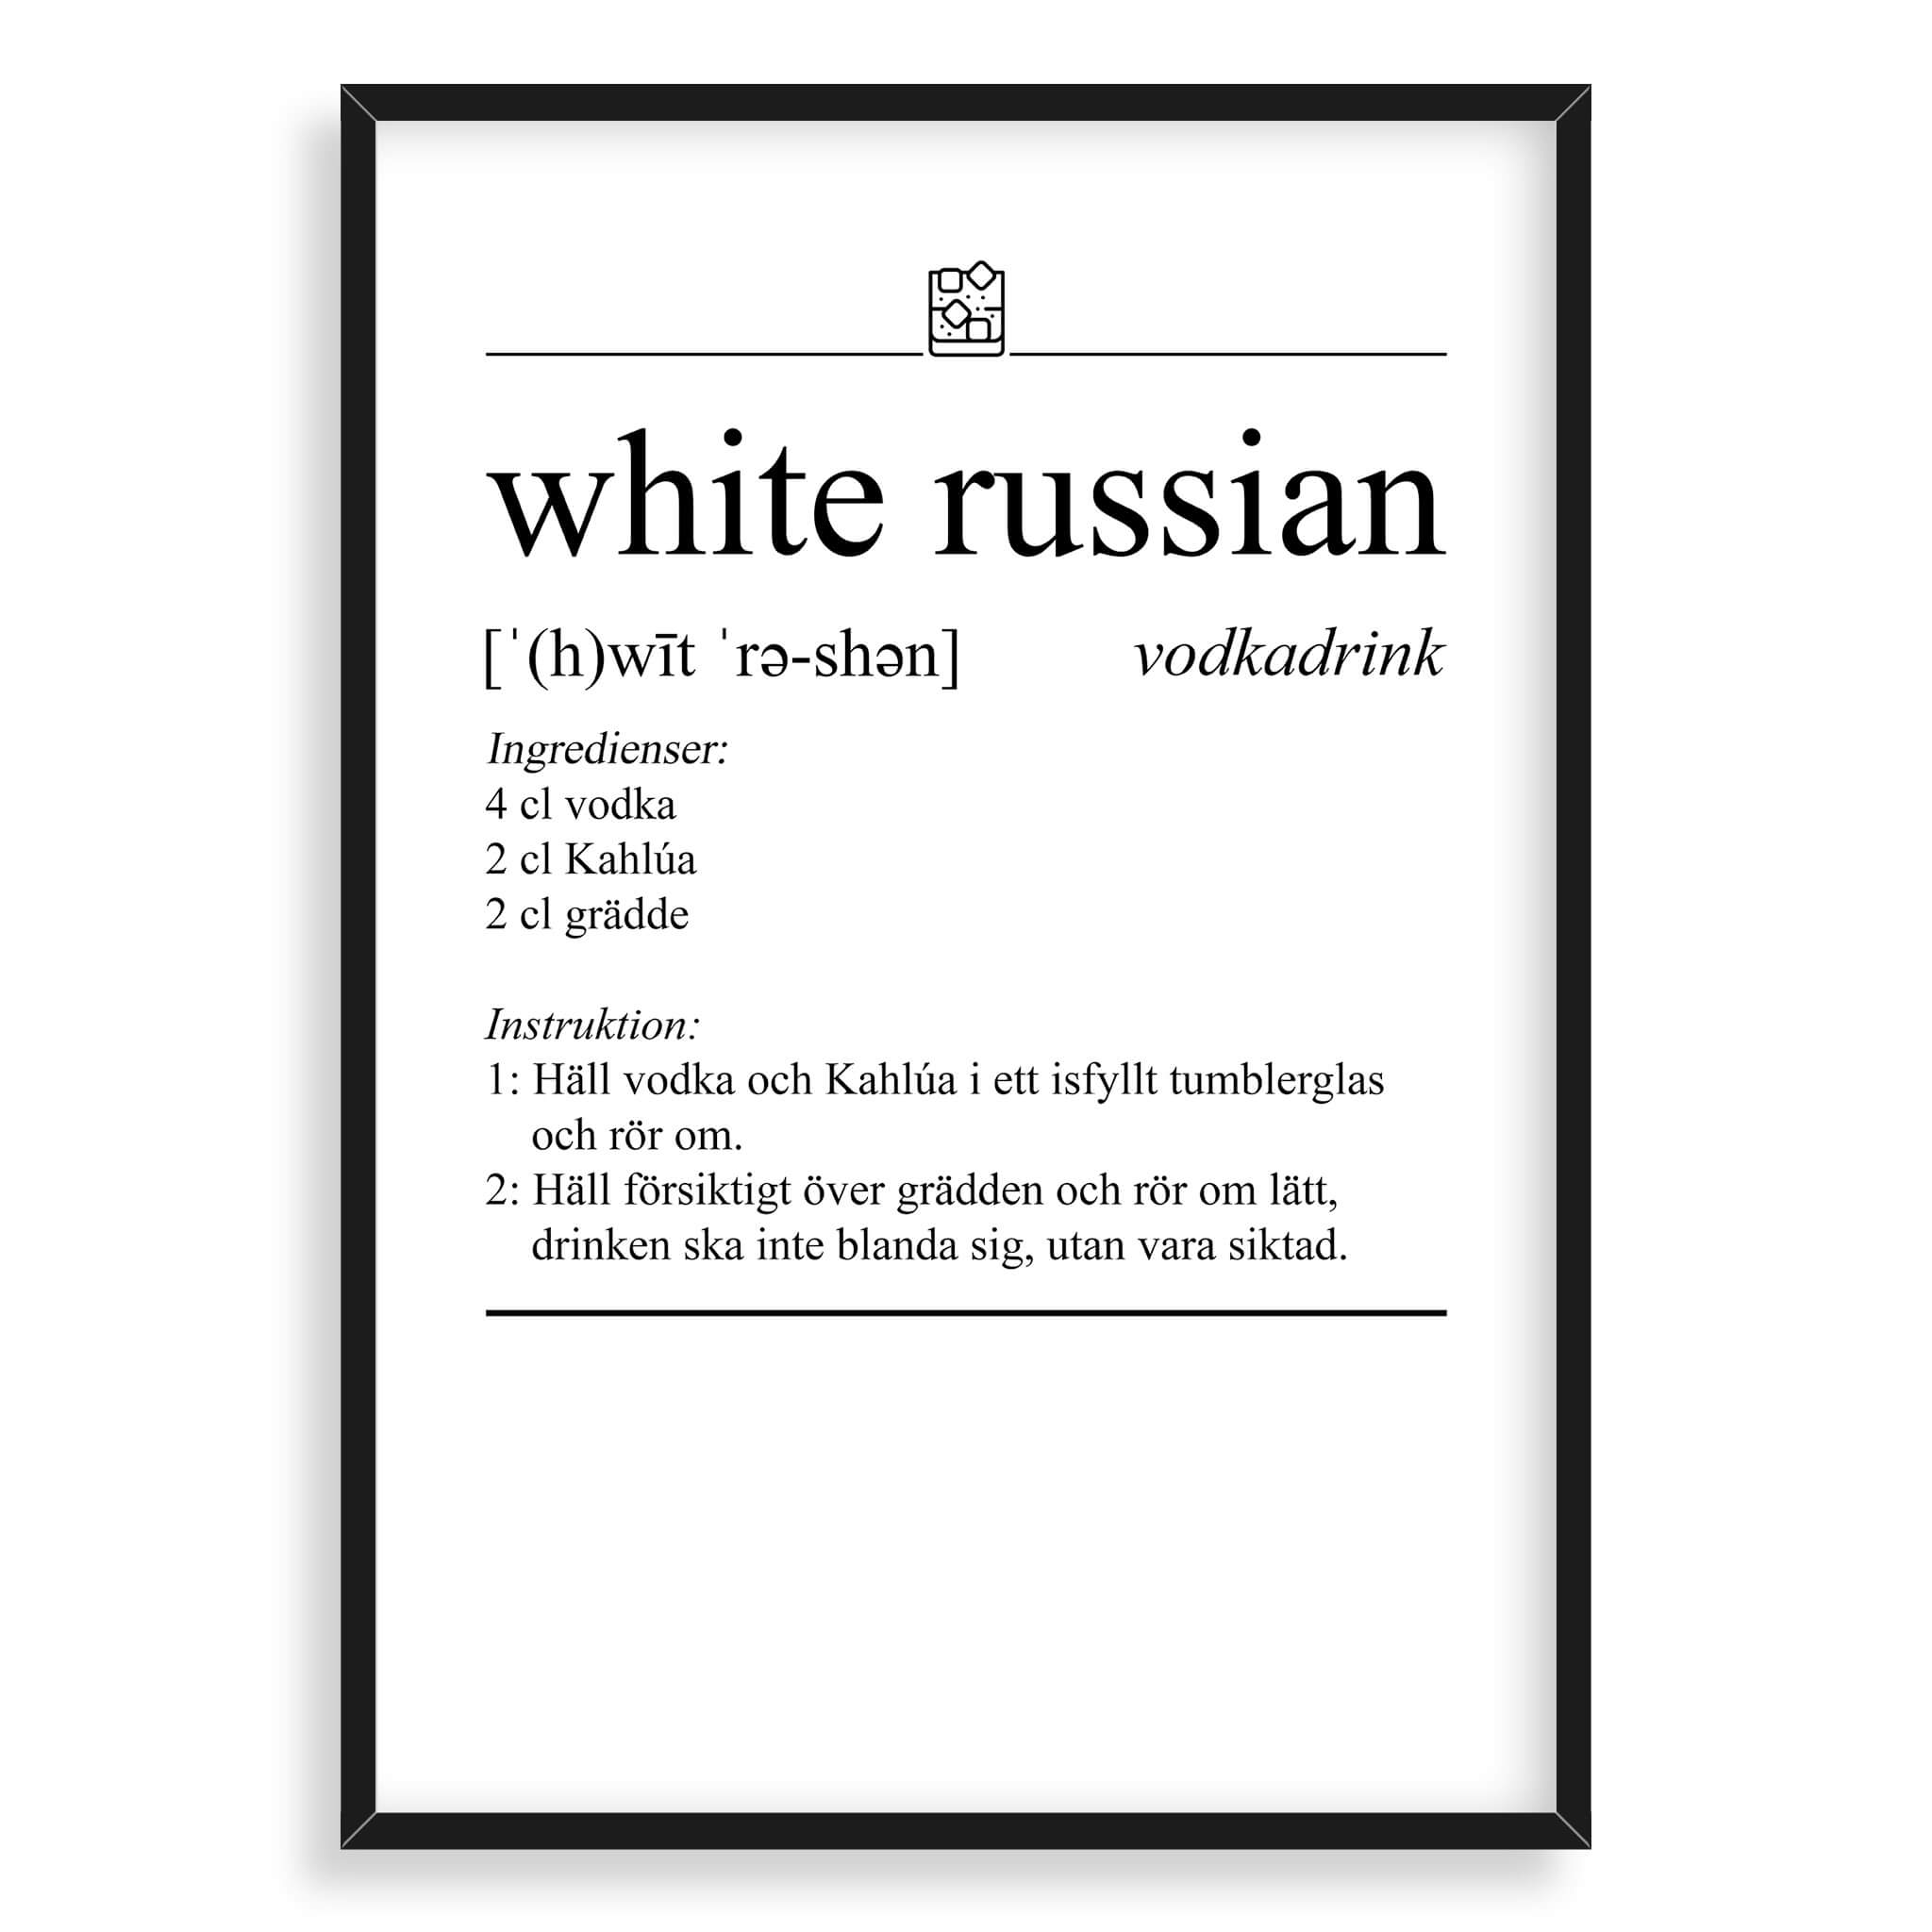 White Russian Poster